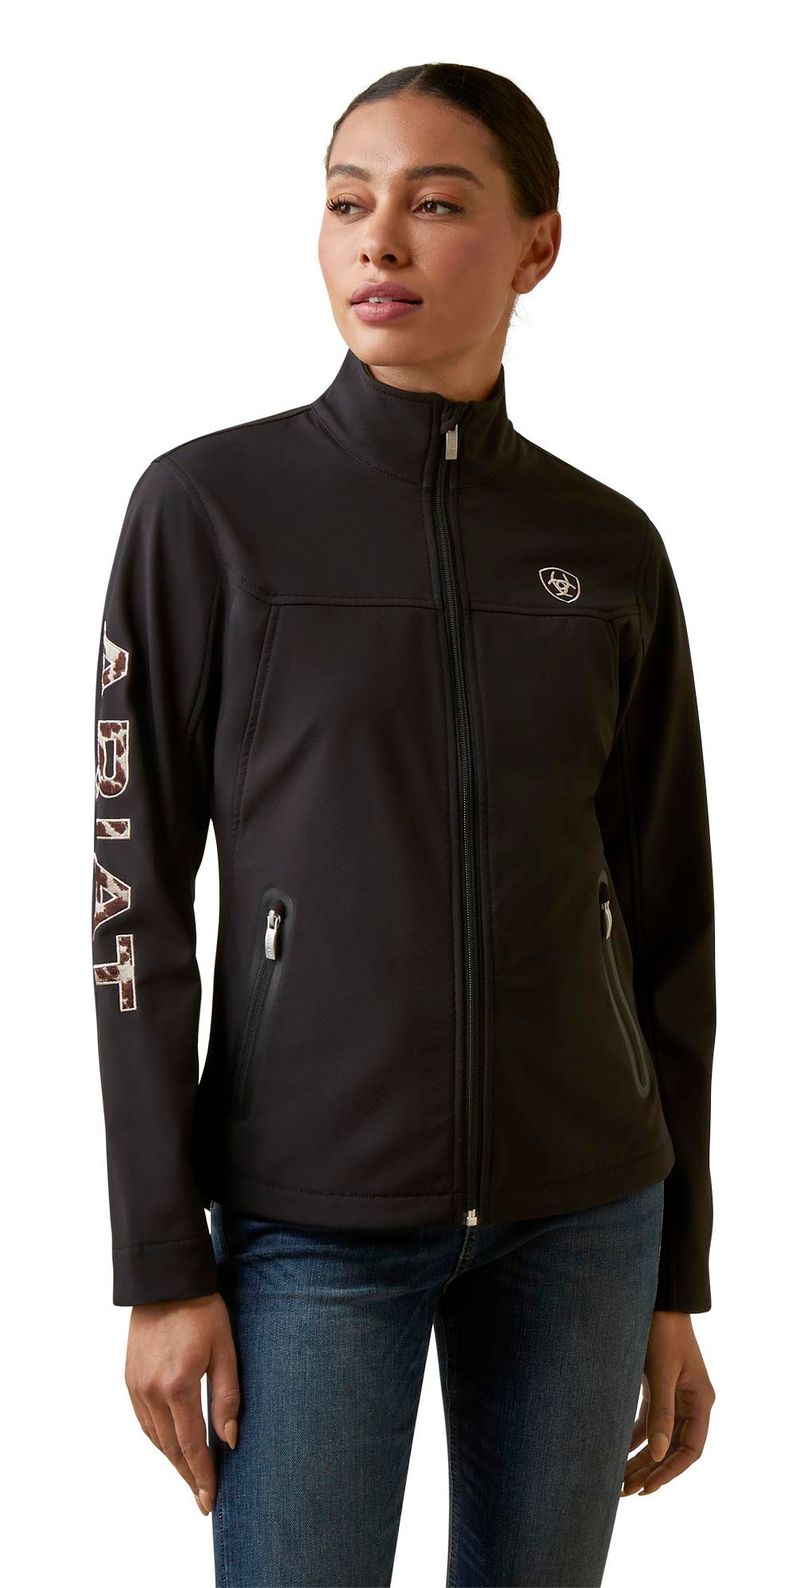 Ariat-Womens-Cow-Print-Embroidered-Team-Softshell-Jacket-Black-XLarge